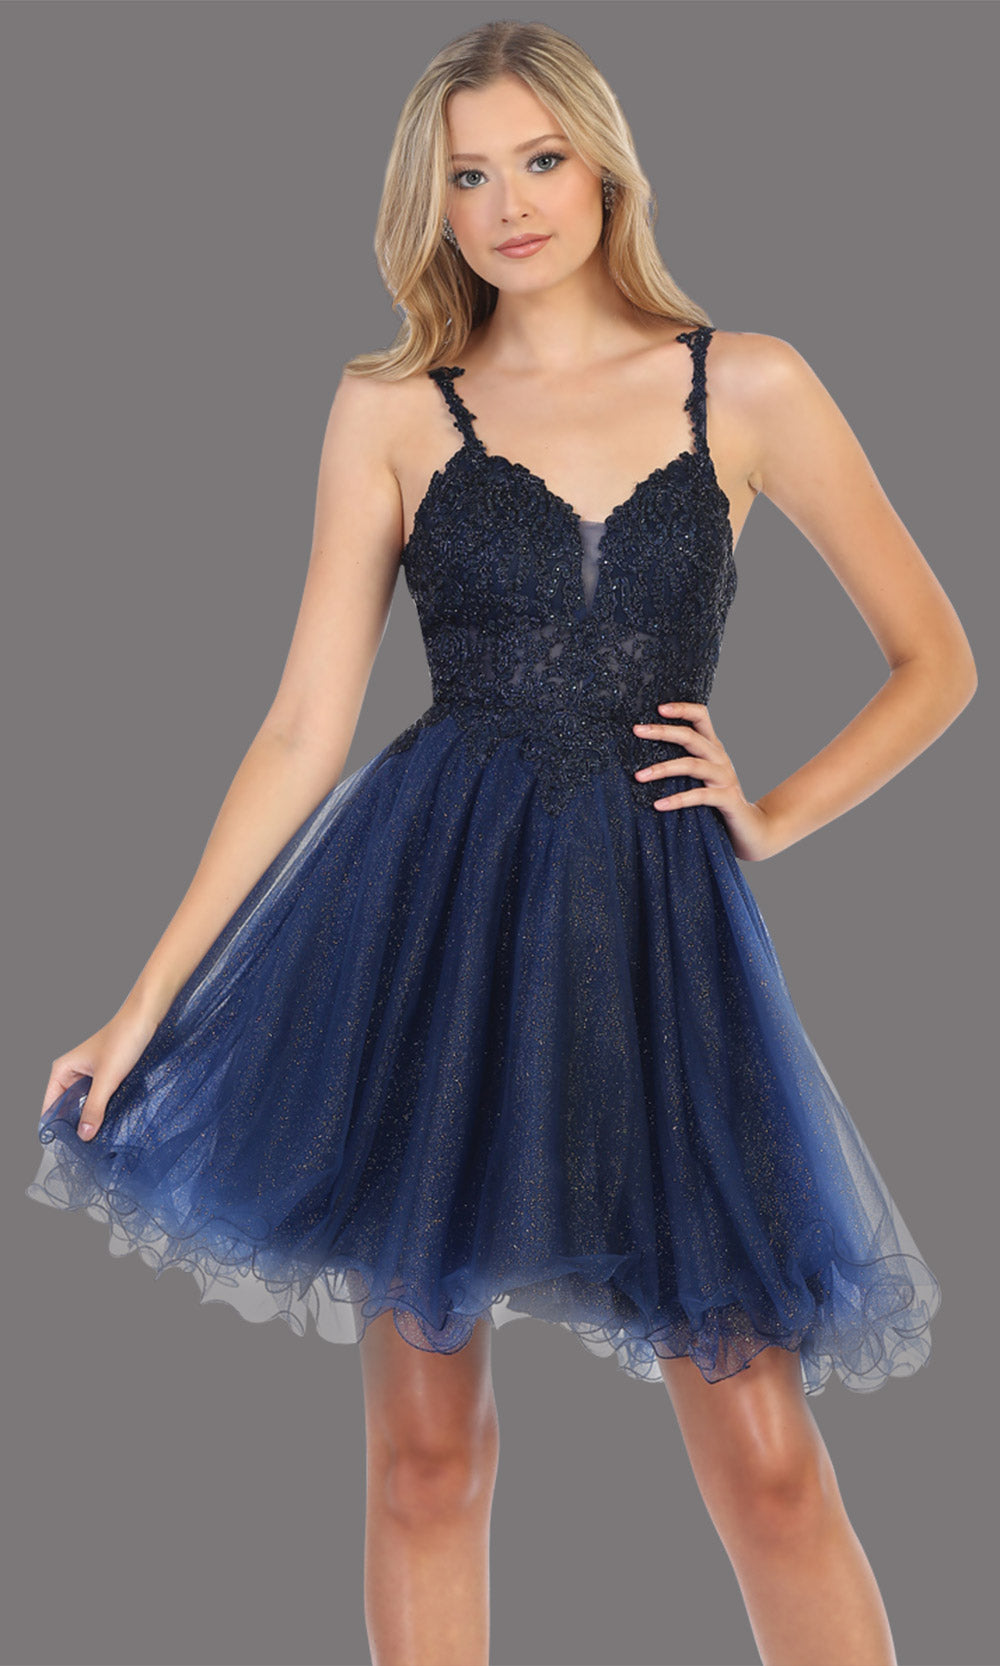 Mayqueen Mq1693 short navy blue flowy v neck beaded sequin grade 8 graduation dress w/straps & puffy skirt. This dark blue party dress is perfect for prom, graduation, grade 8 grad, confirmation dress, bat mitzvah dress, damas. Plus sizes avail.jpggrade 8 grad dresses, graduation dresses